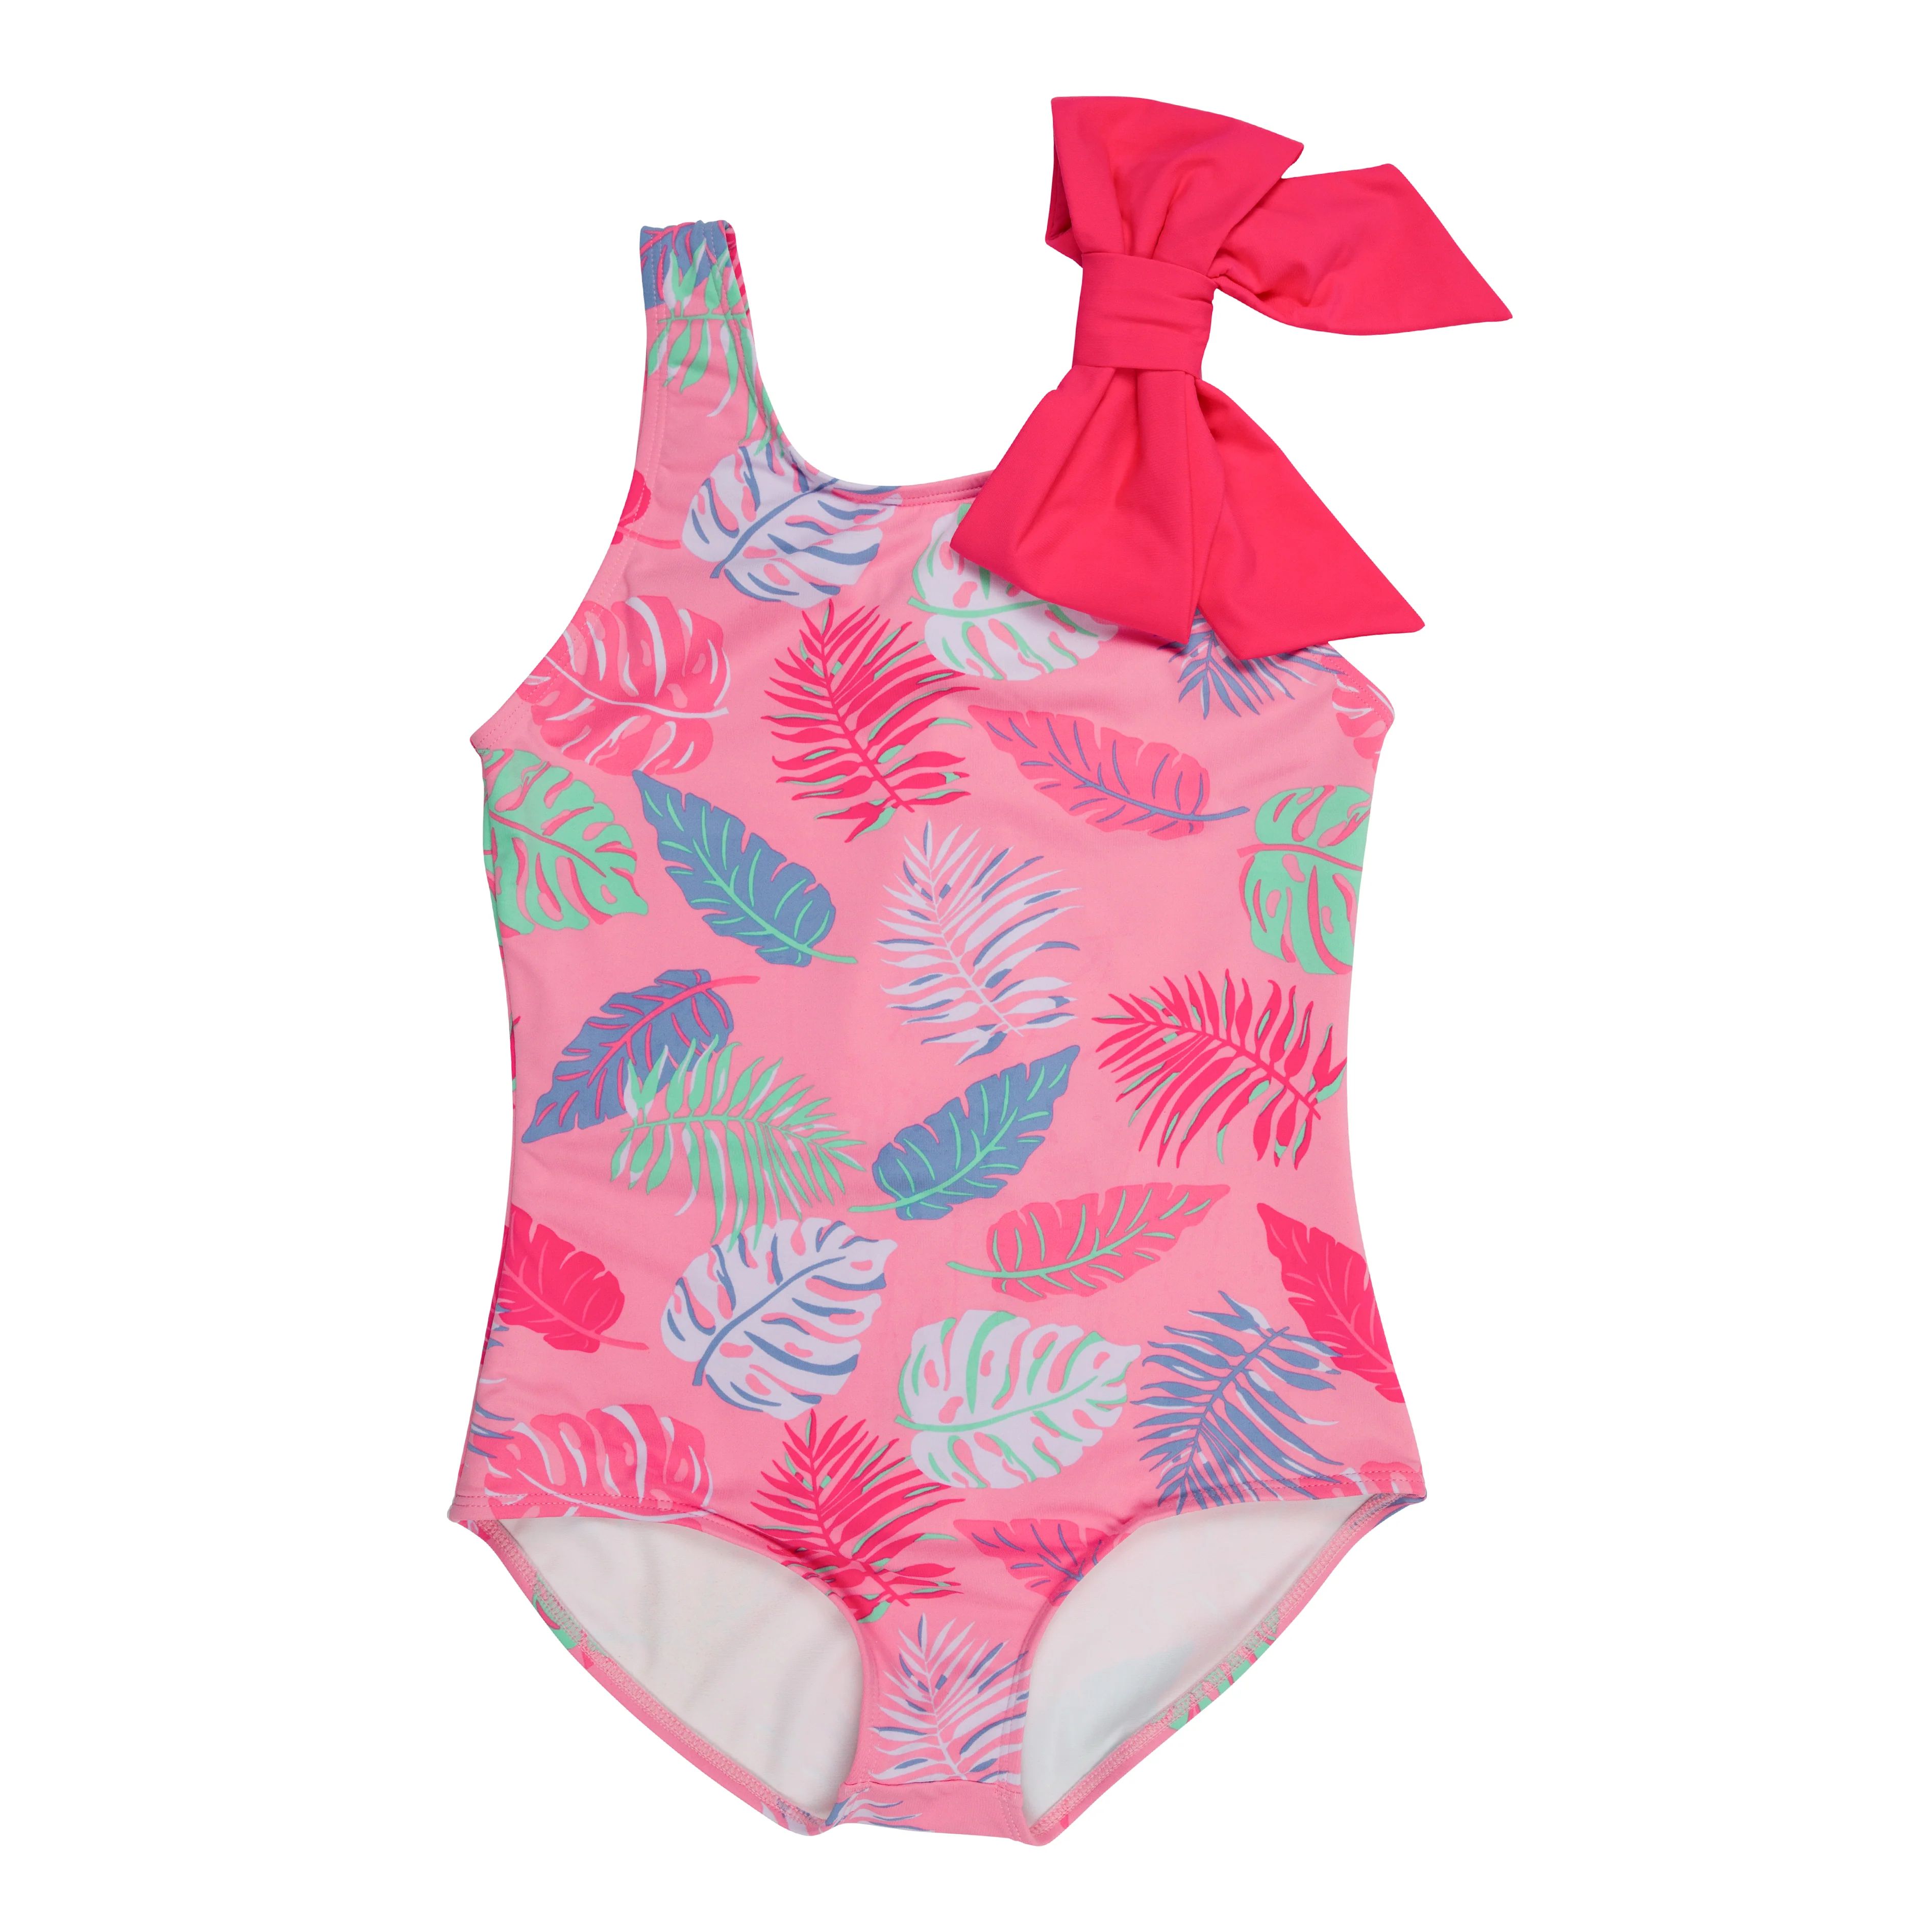 Brookhaven Bow Bathing Suit - Caicos Canopy with Pompano Punch | The Beaufort Bonnet Company